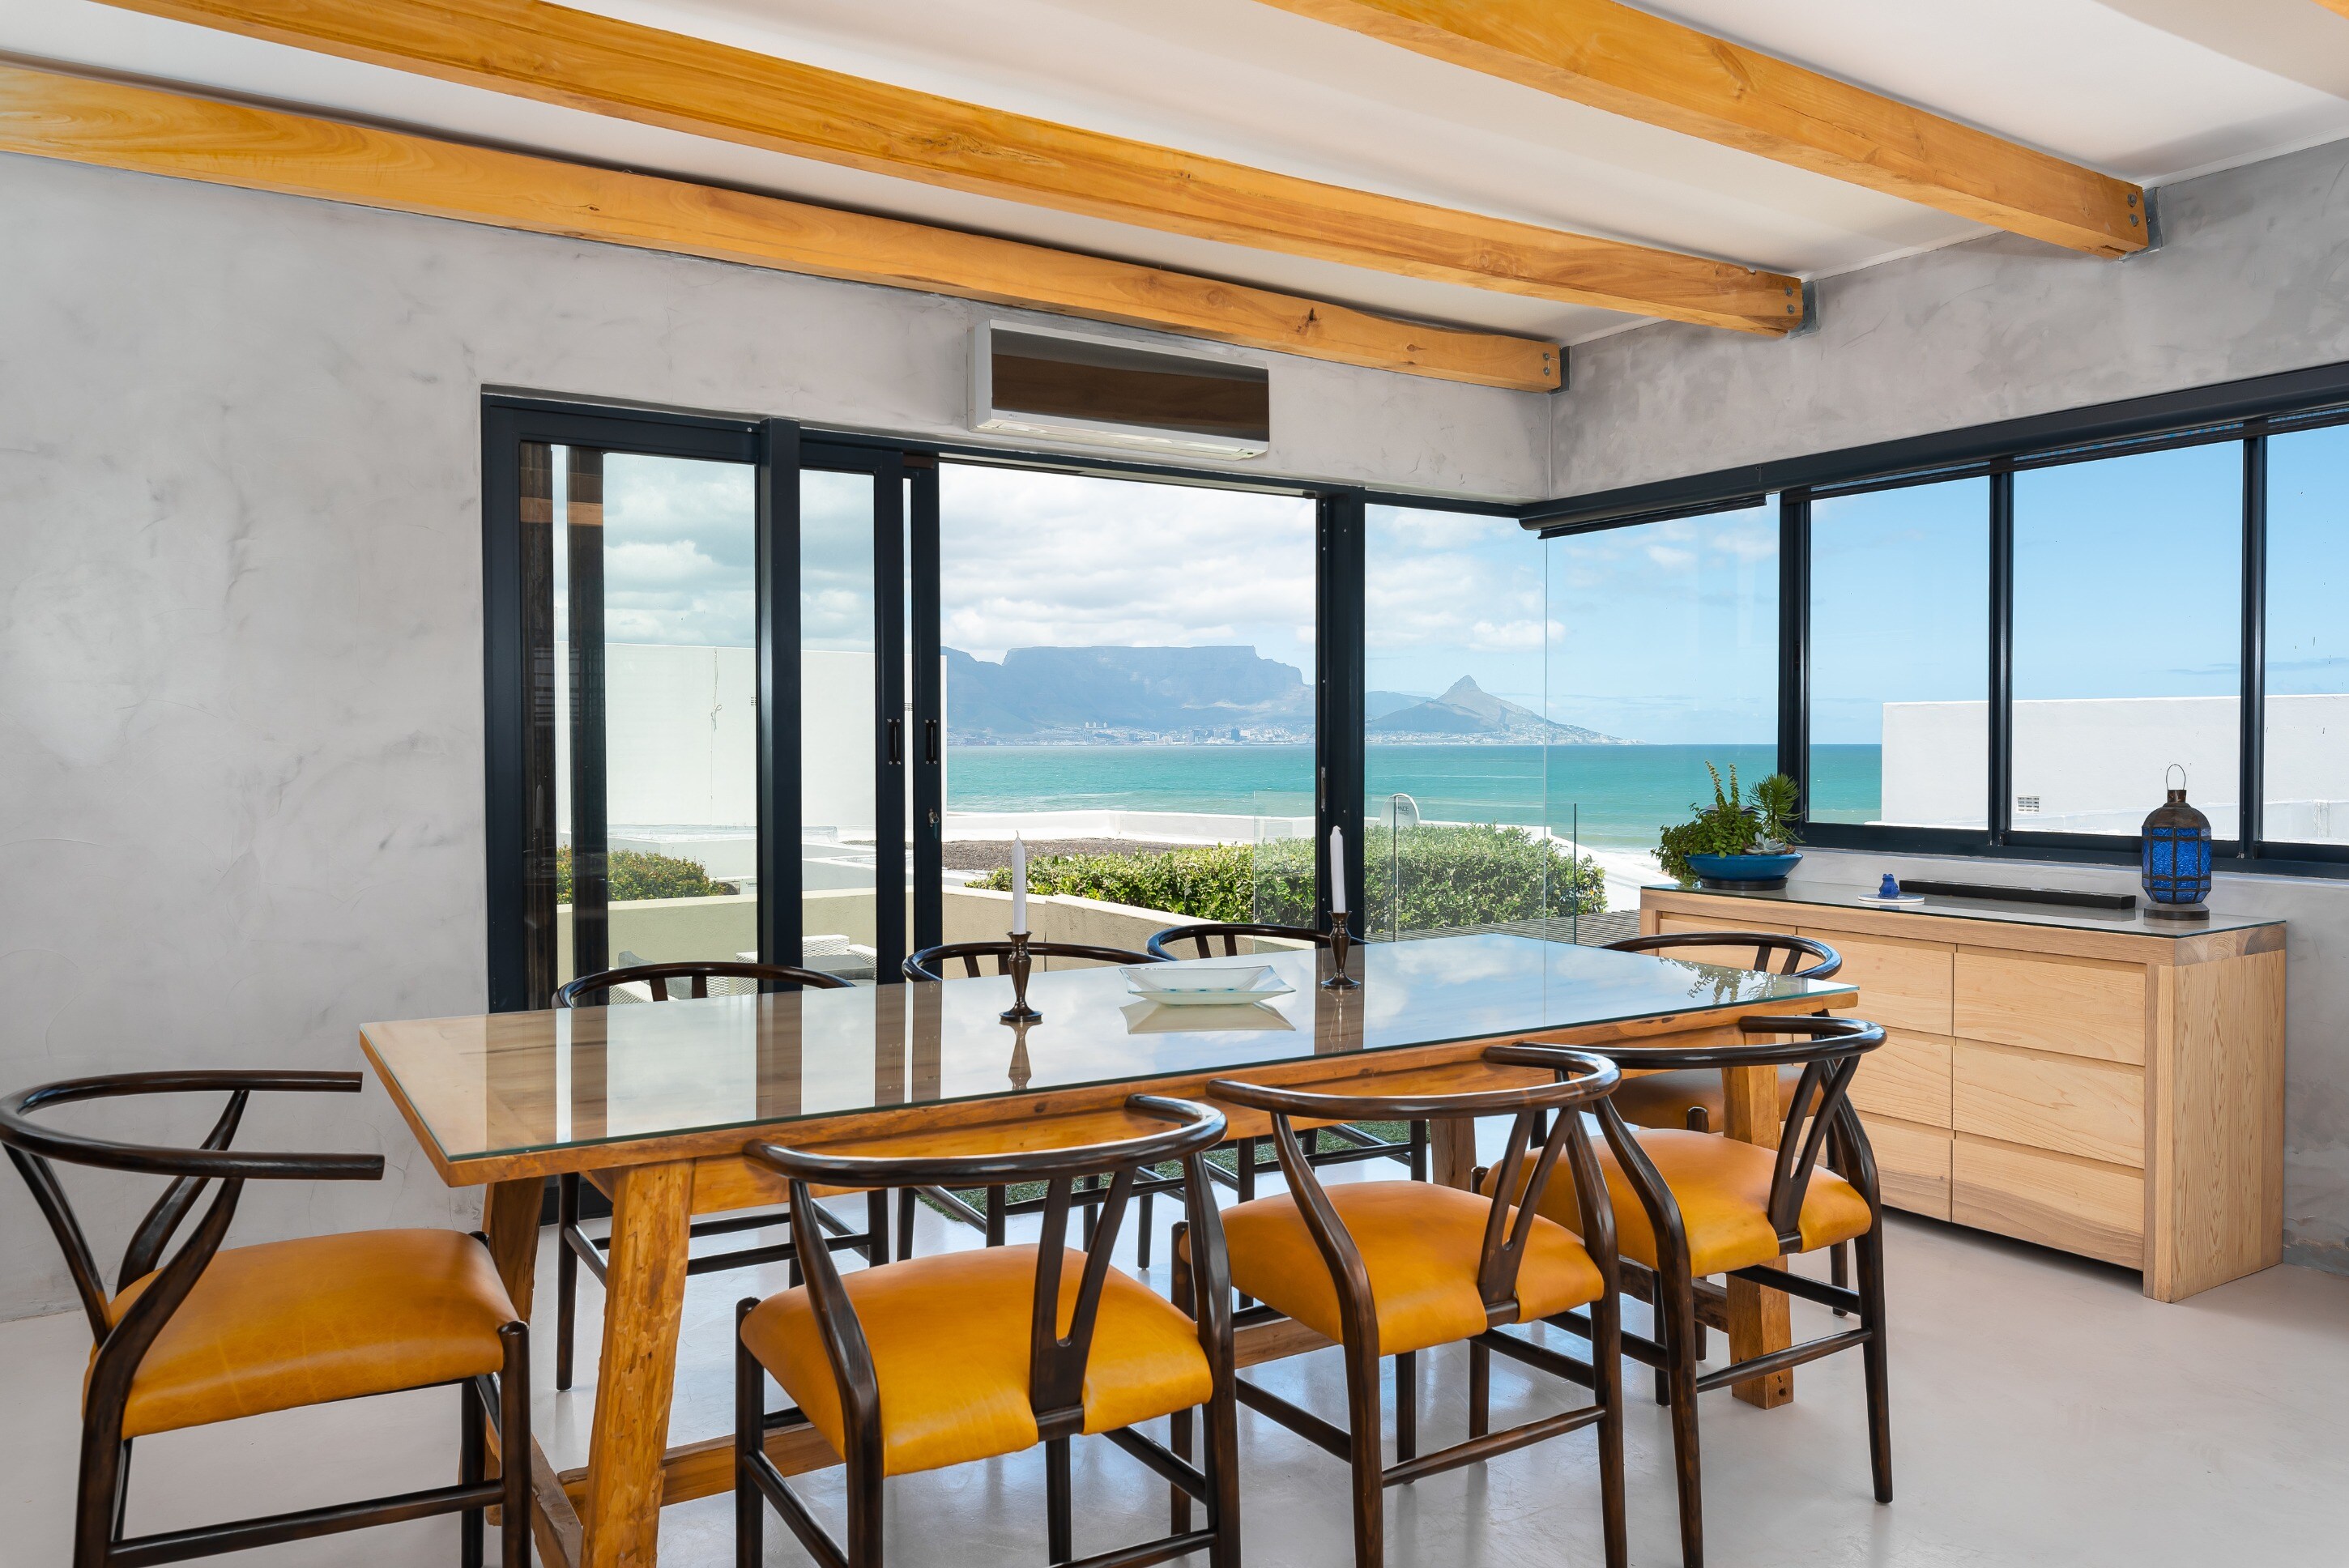 Property Image 2 - Spacious and light four bedroom overlooking Blouberg beach and Table Mountain